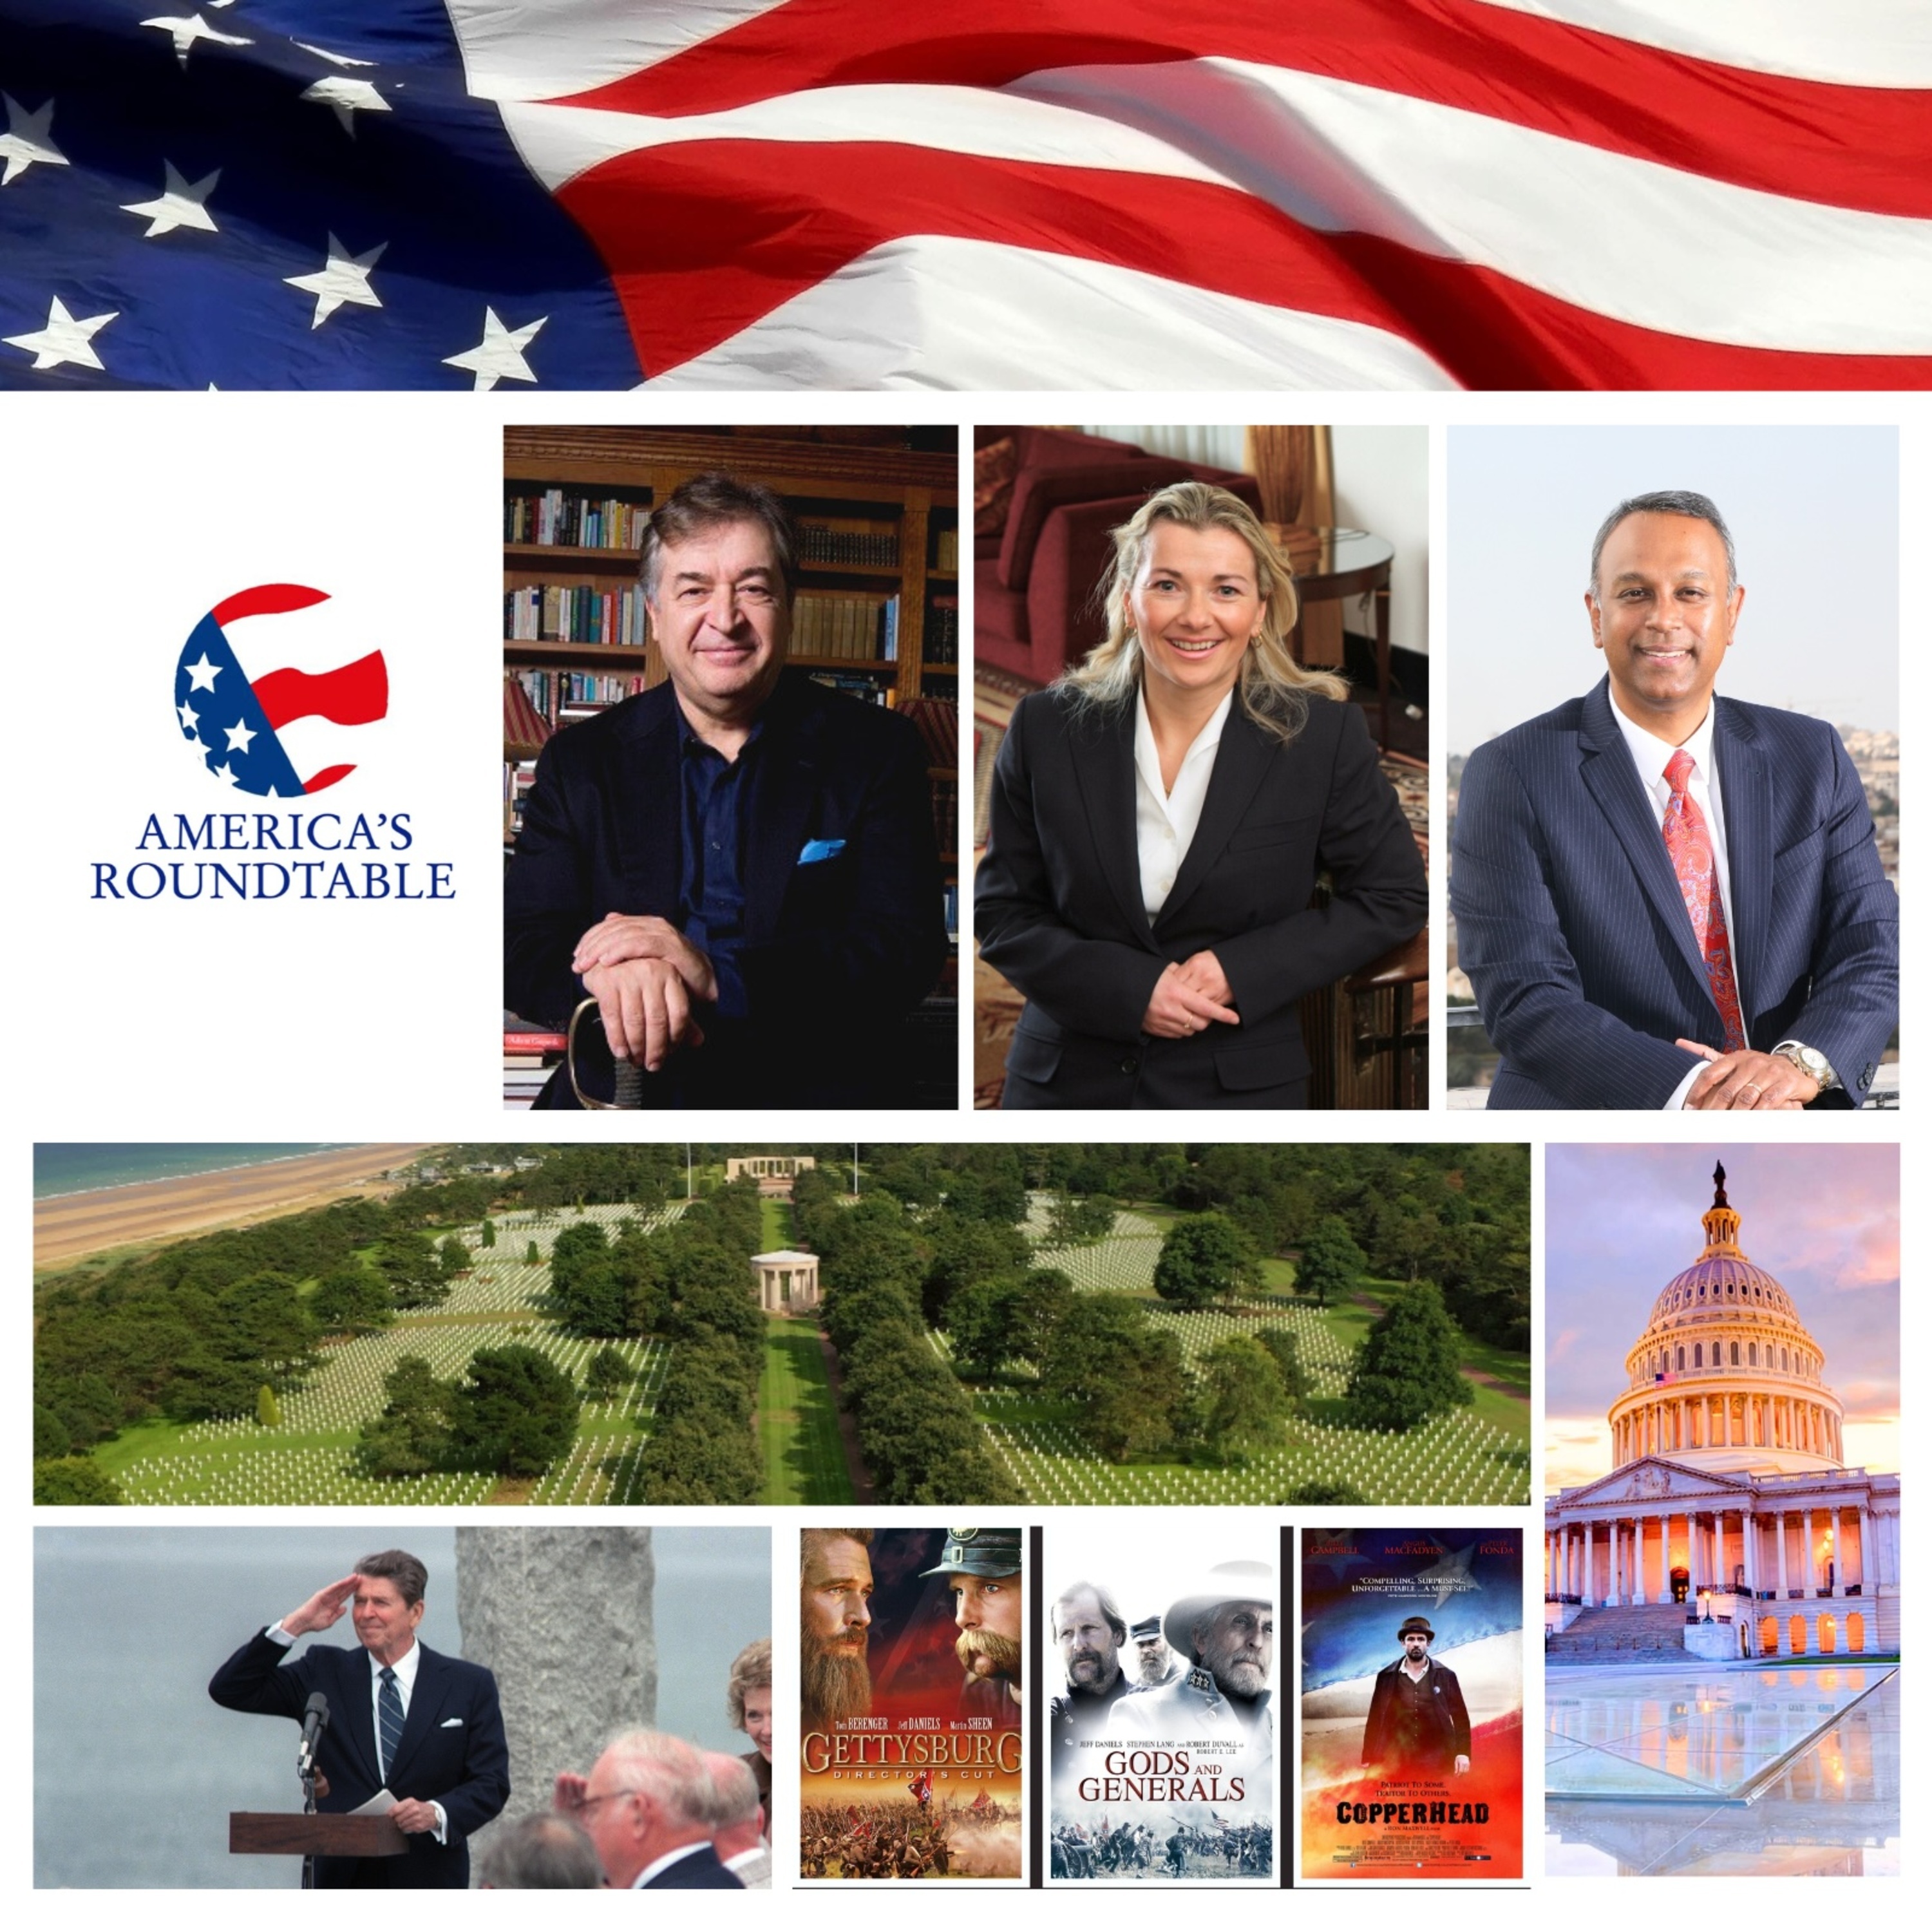 America's Roundtable with Ron Maxwell, American Film Director and Screenwriter − "Gettysburg" and "Gods and Generals"  | 80th Anniversary of D-Day, Normandy, France |  Addressing Isolationism in America | Russia's War on Ukraine